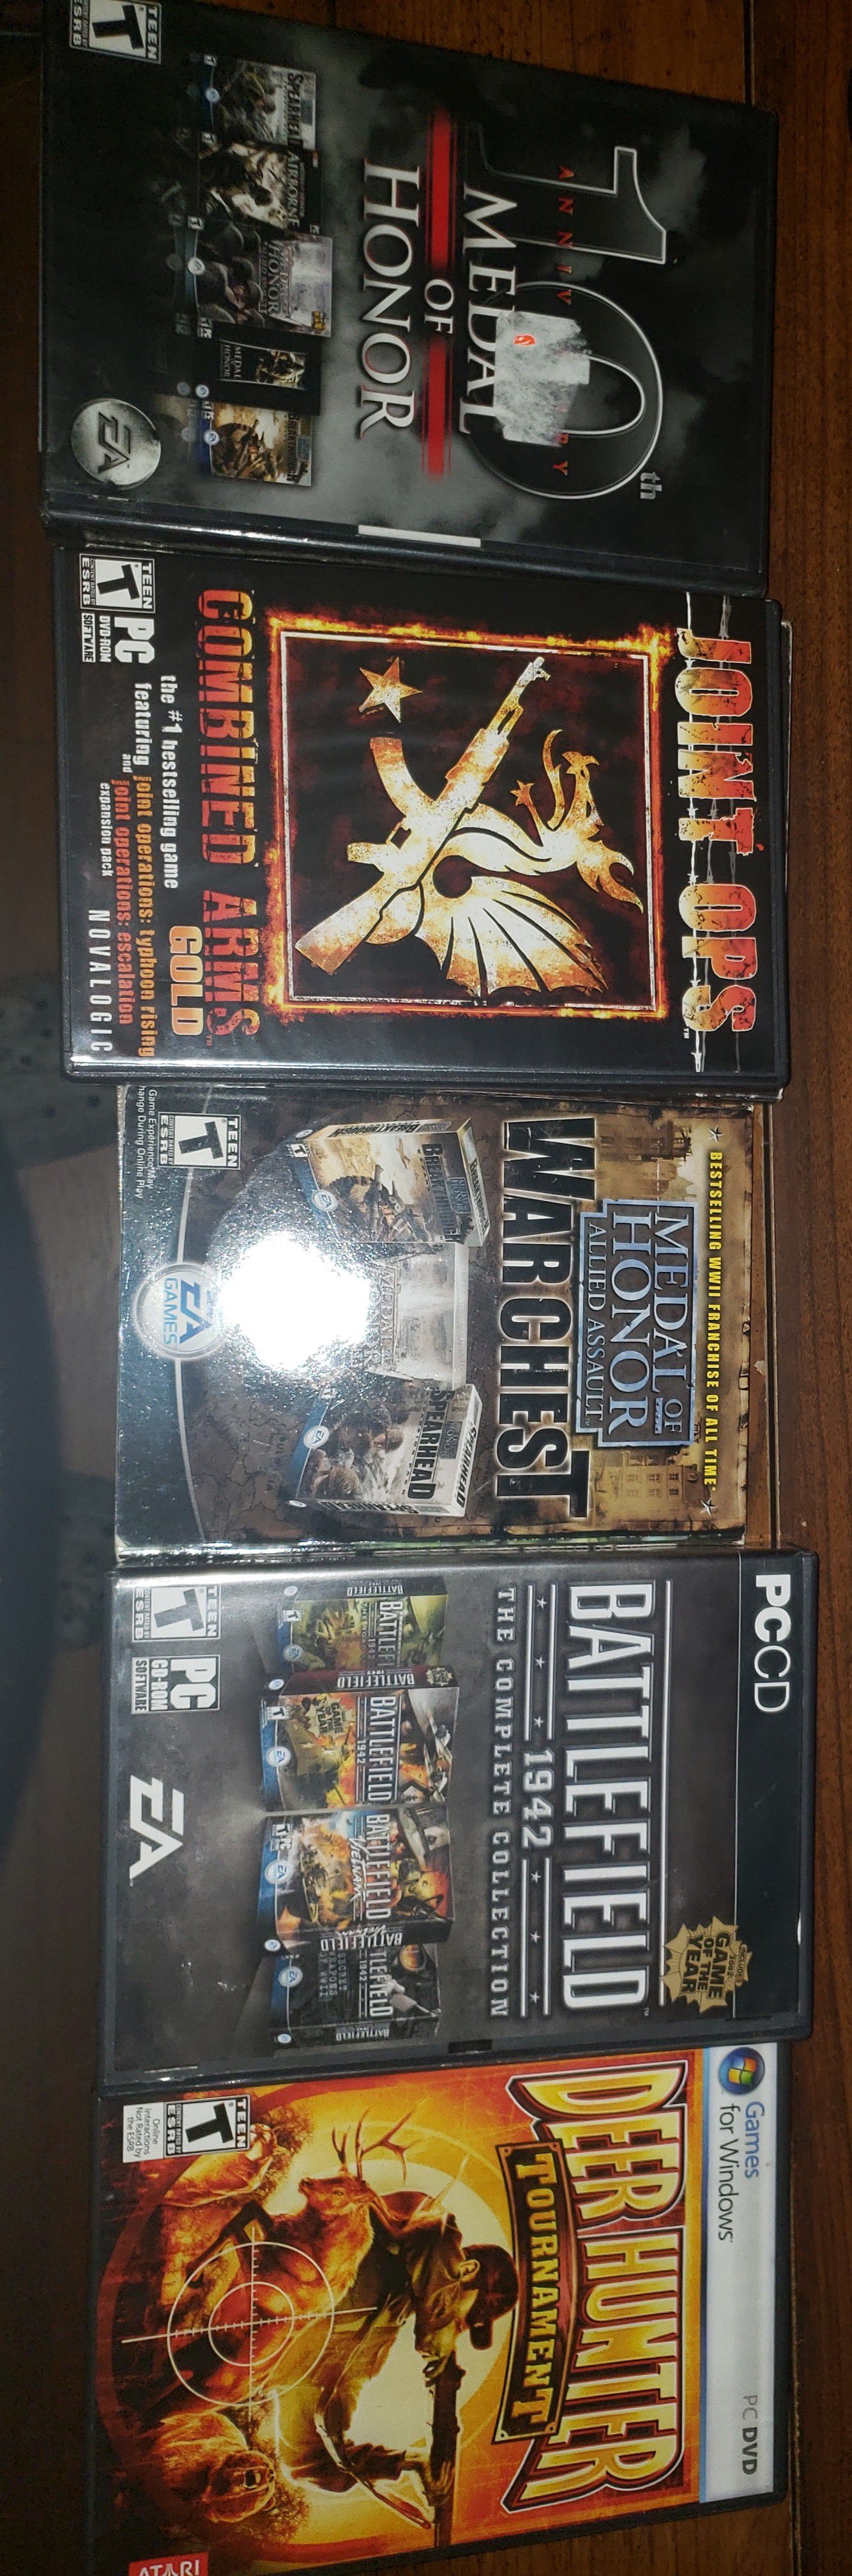 Nothing wrong with them good condition pc games or willing to trade